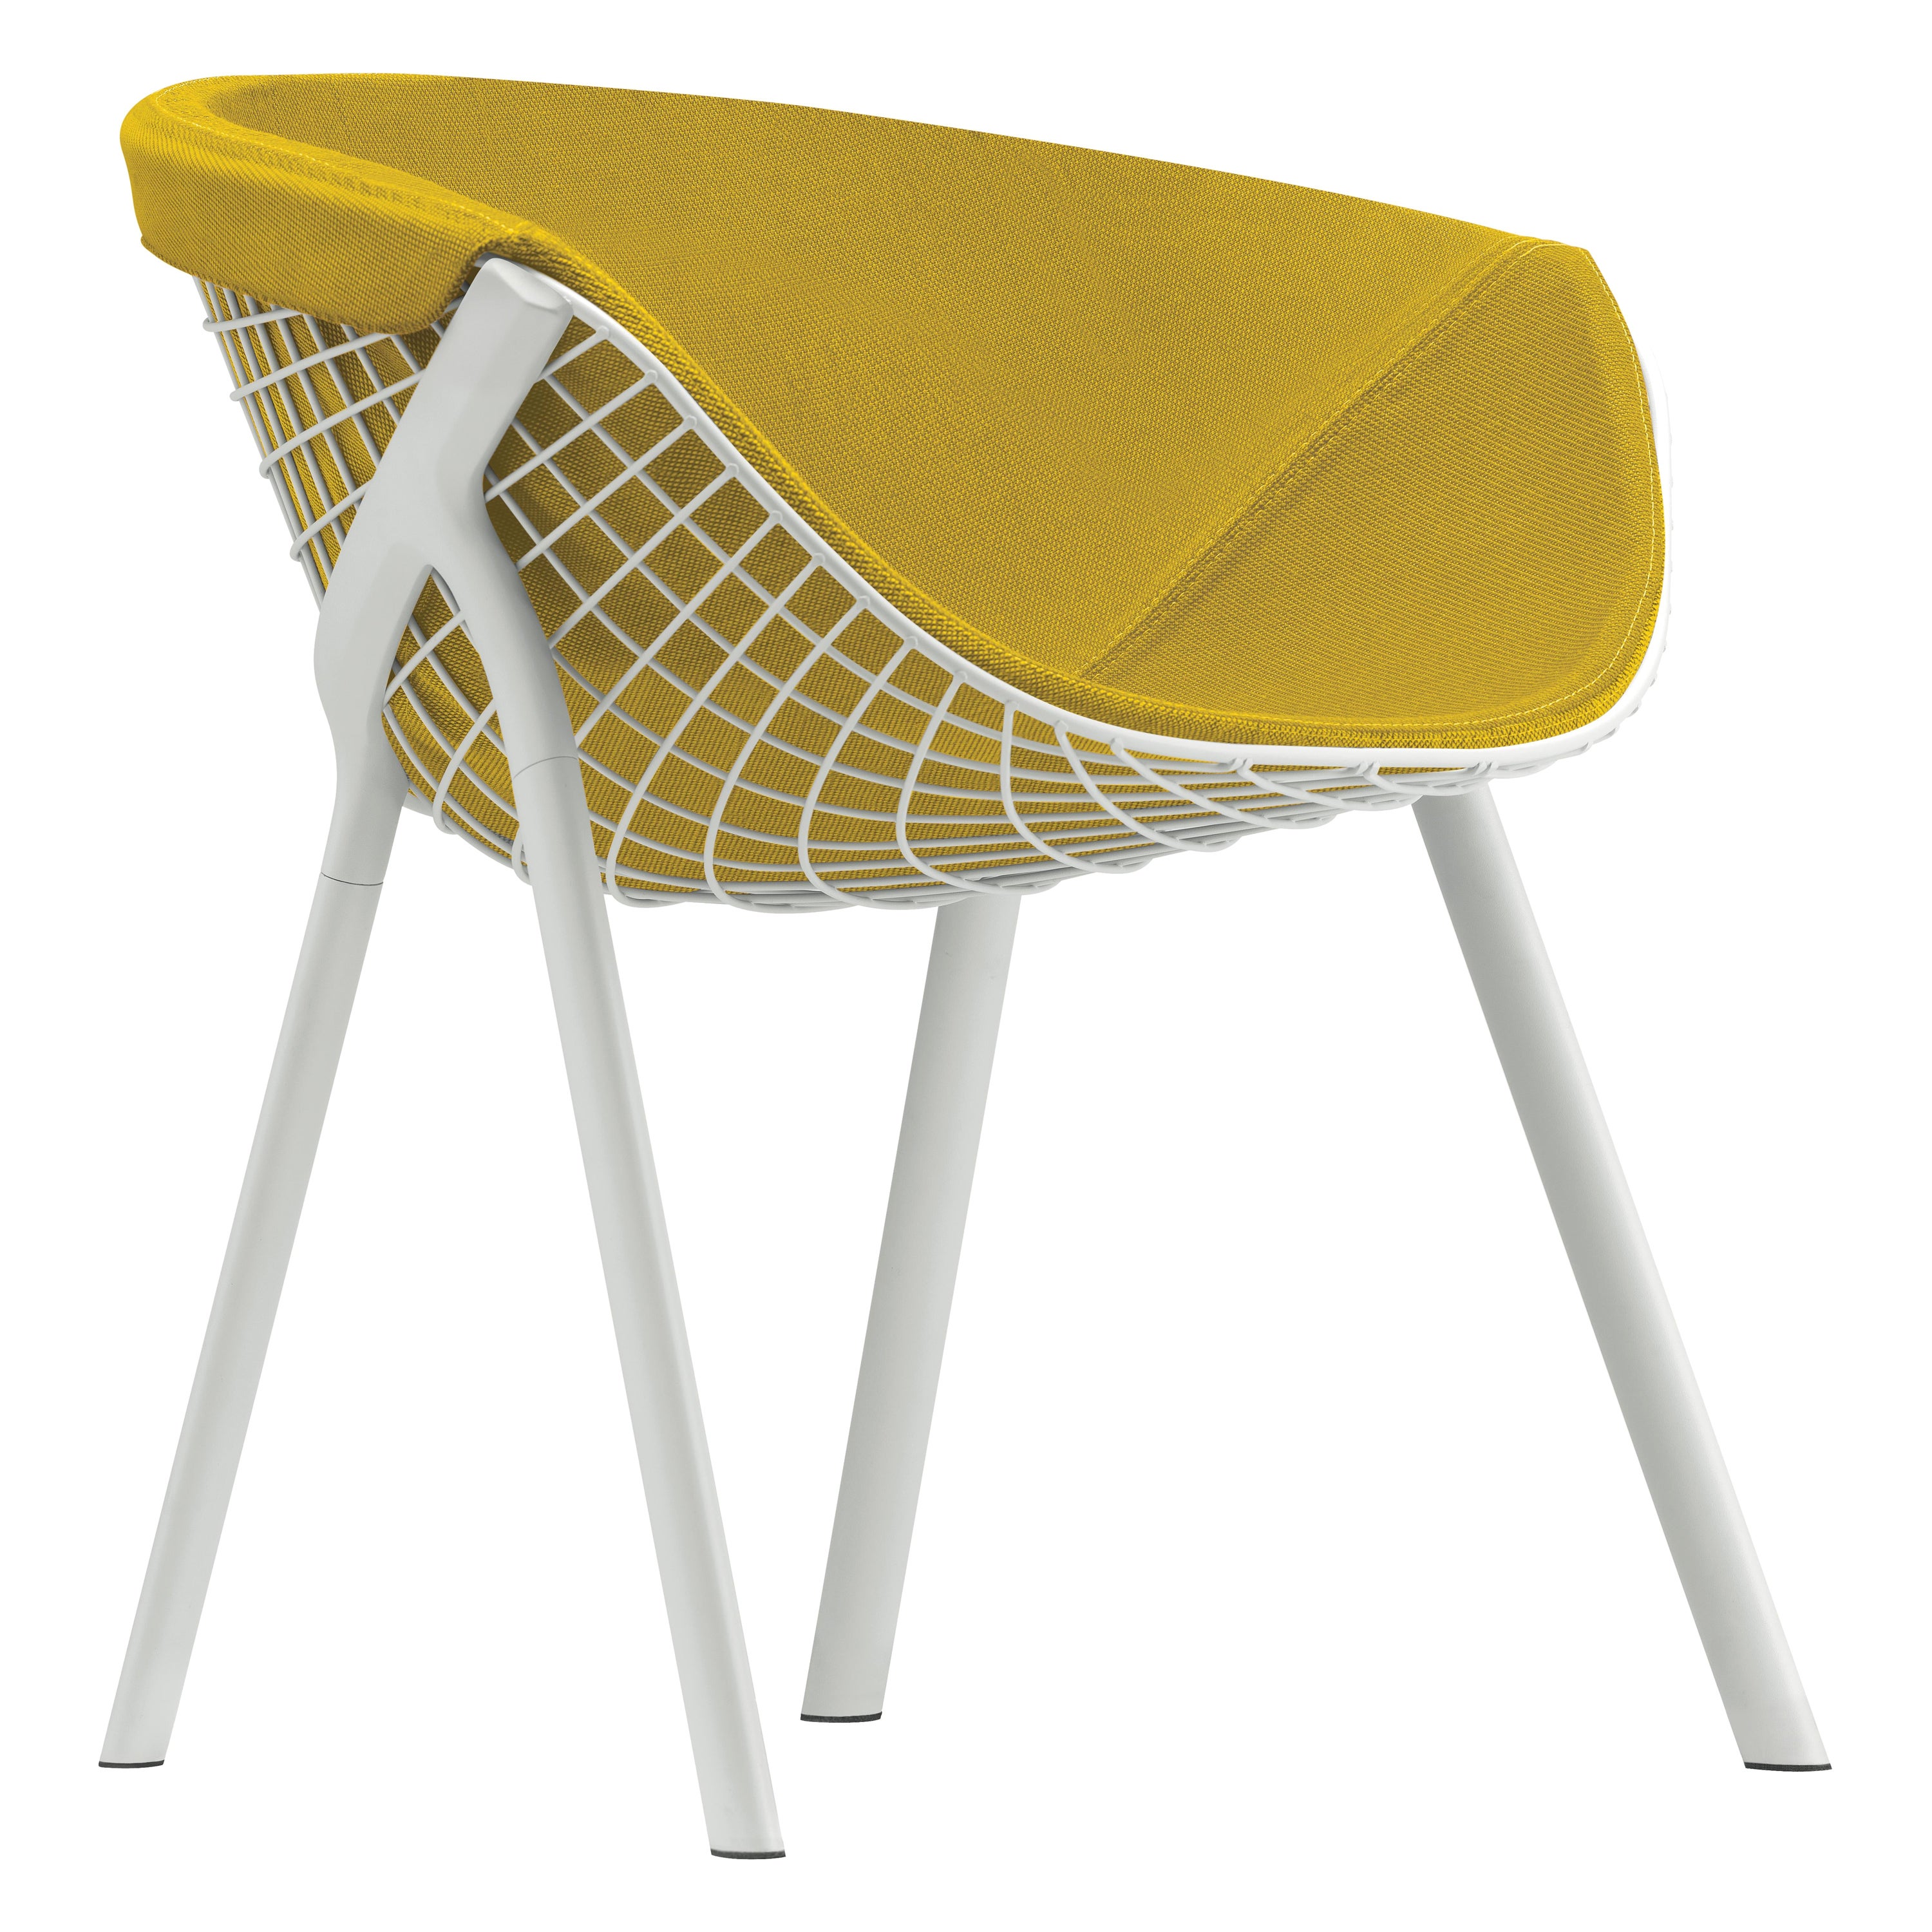 Alias 040 Kobi Chair with Large Pad in Yellow and White Lacquered Aluminum Frame For Sale